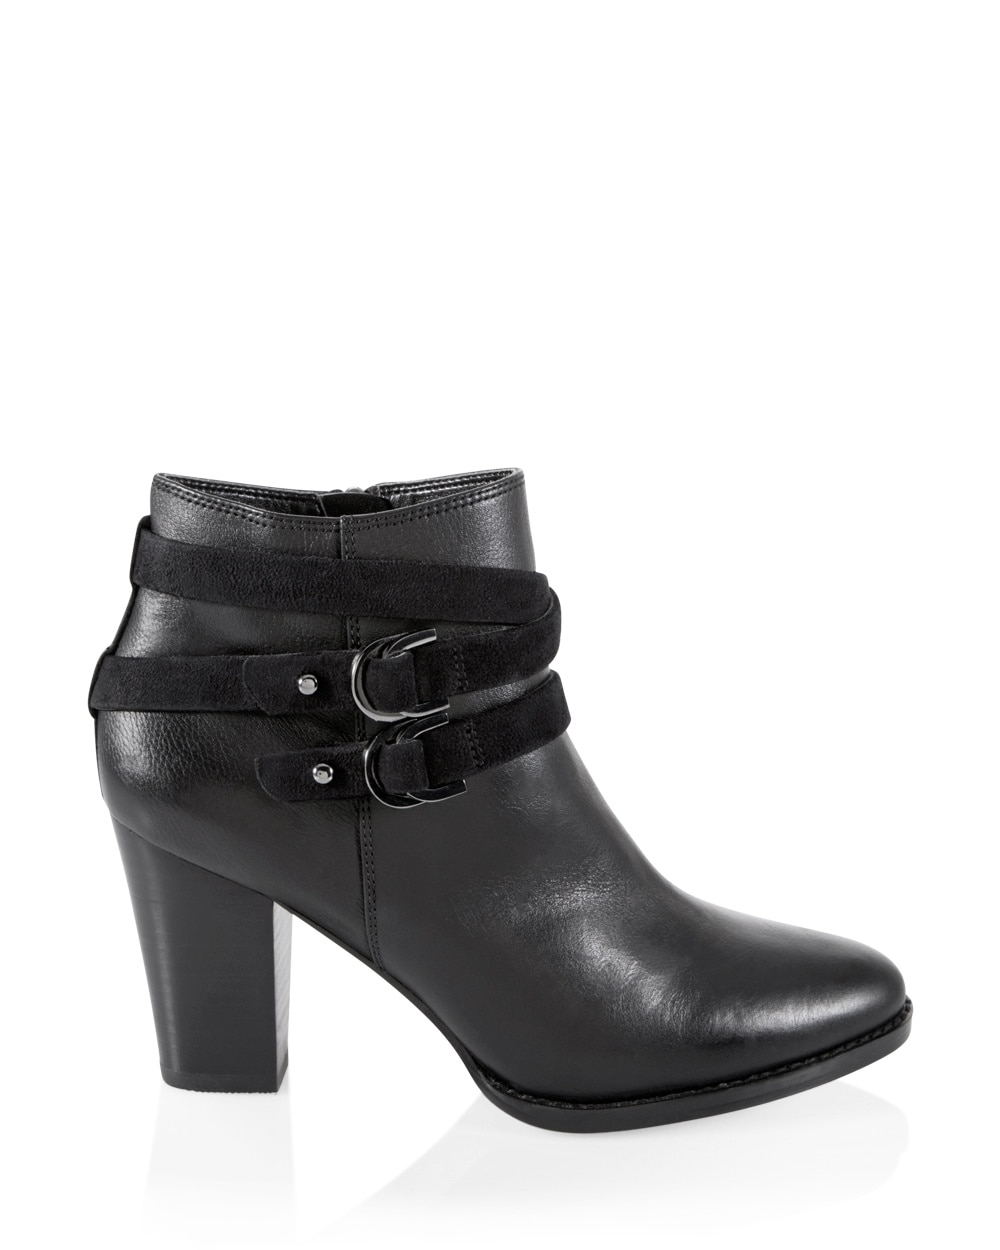 Leather Moto Ankle Boots - White House Black Market